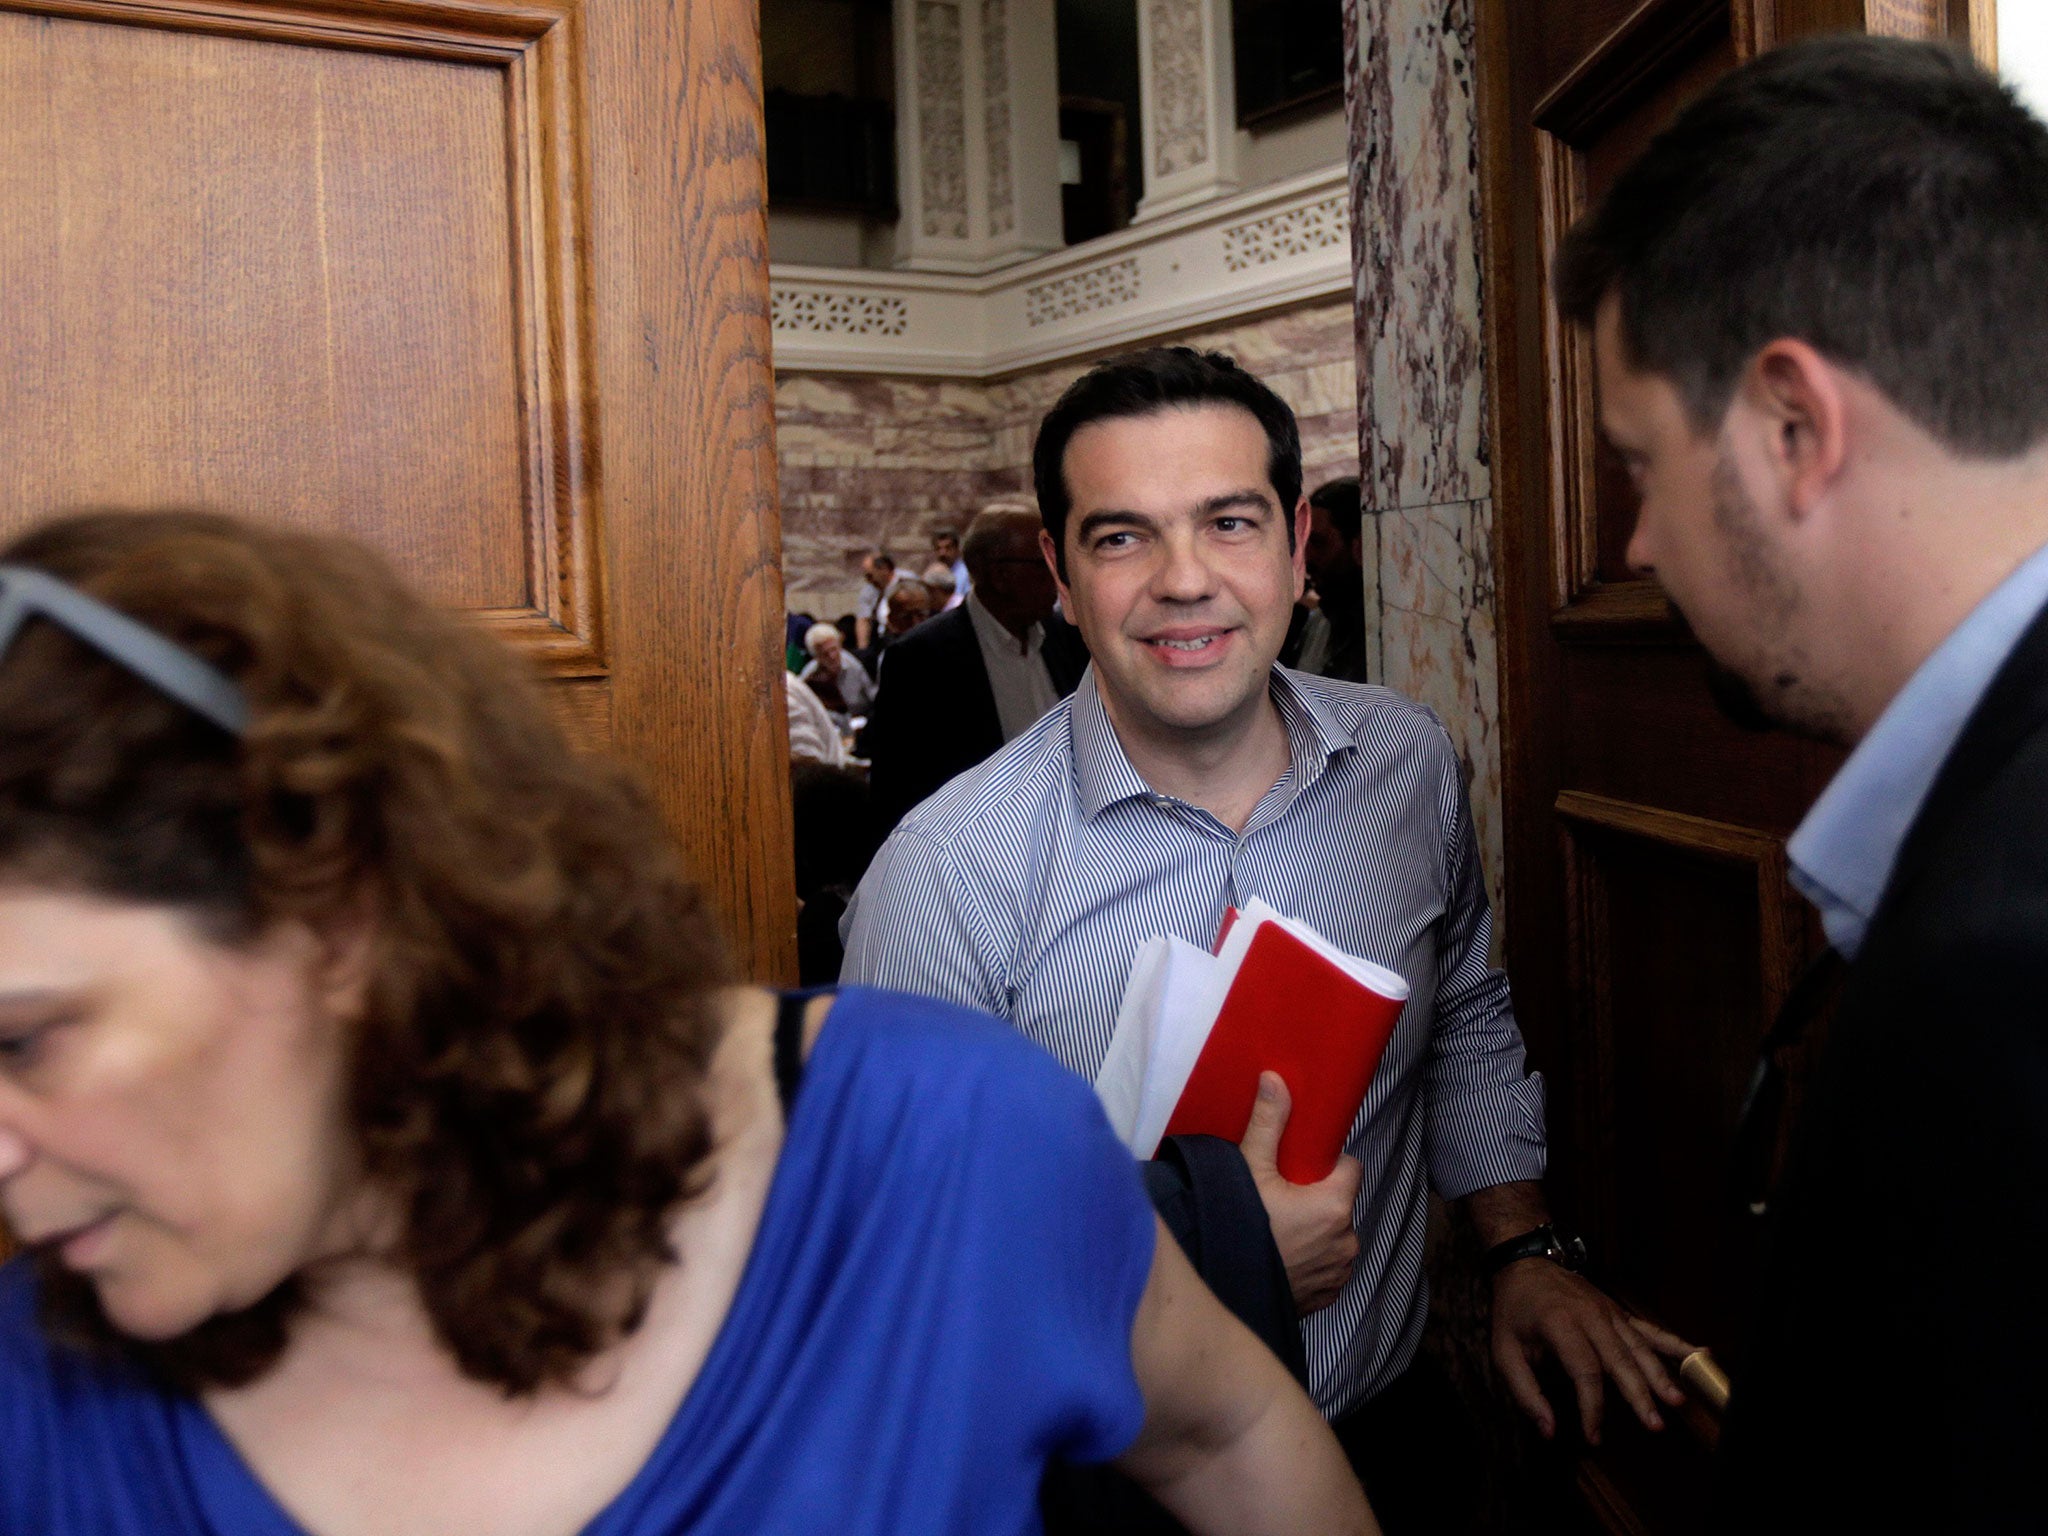 Alexis Tsipras exits a meeting of the Parliamentary group of SYRIZA party in the Greek Parliament